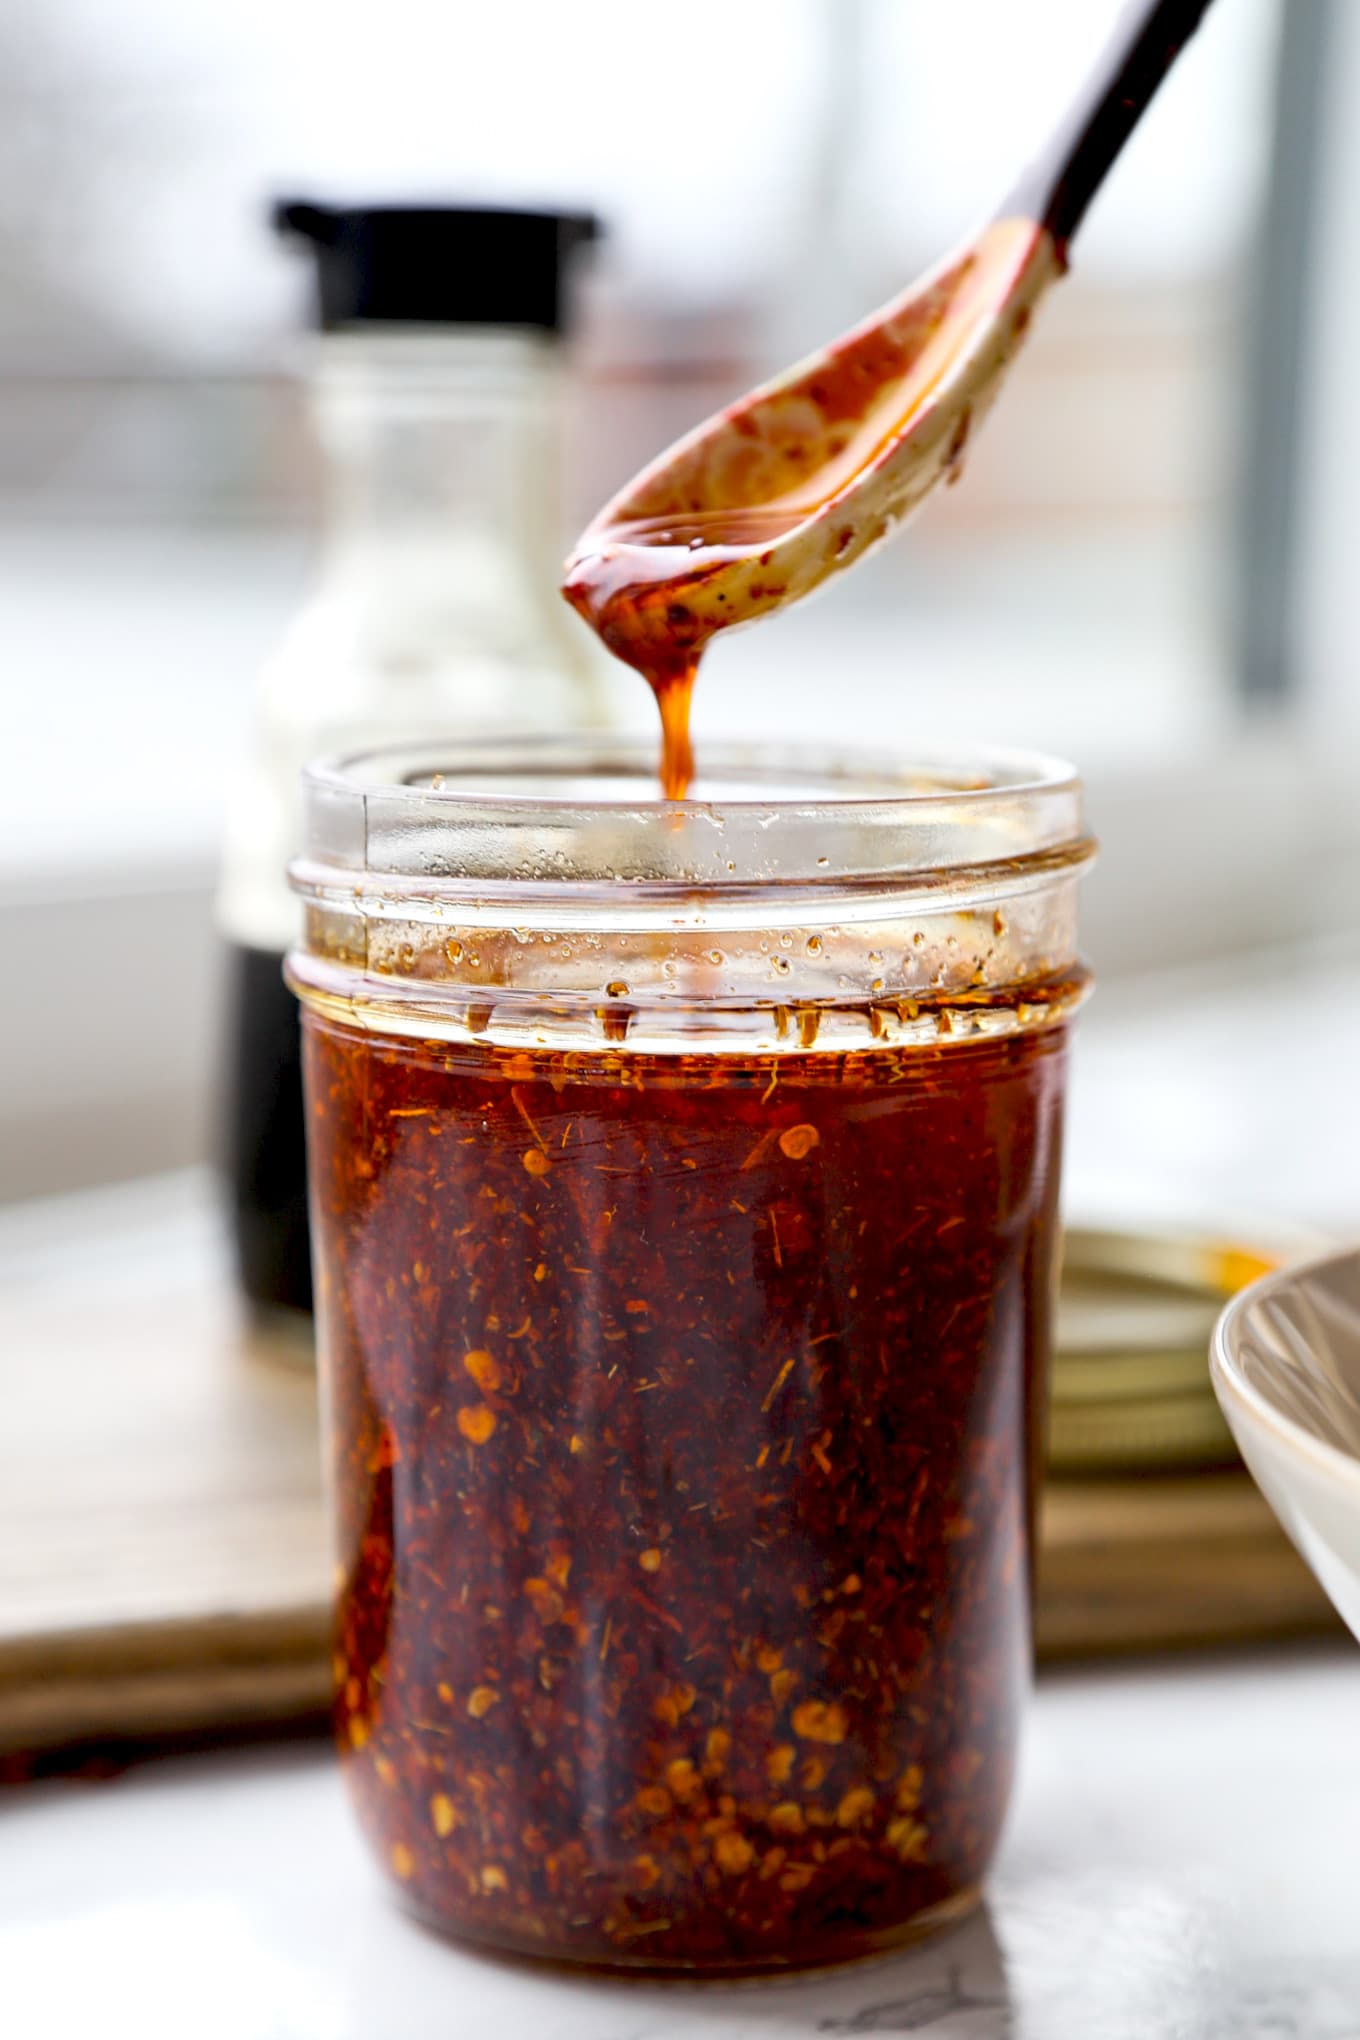 How to Make Chili Oil That's Aromatic and Flavorful - Cooking in Chinglish